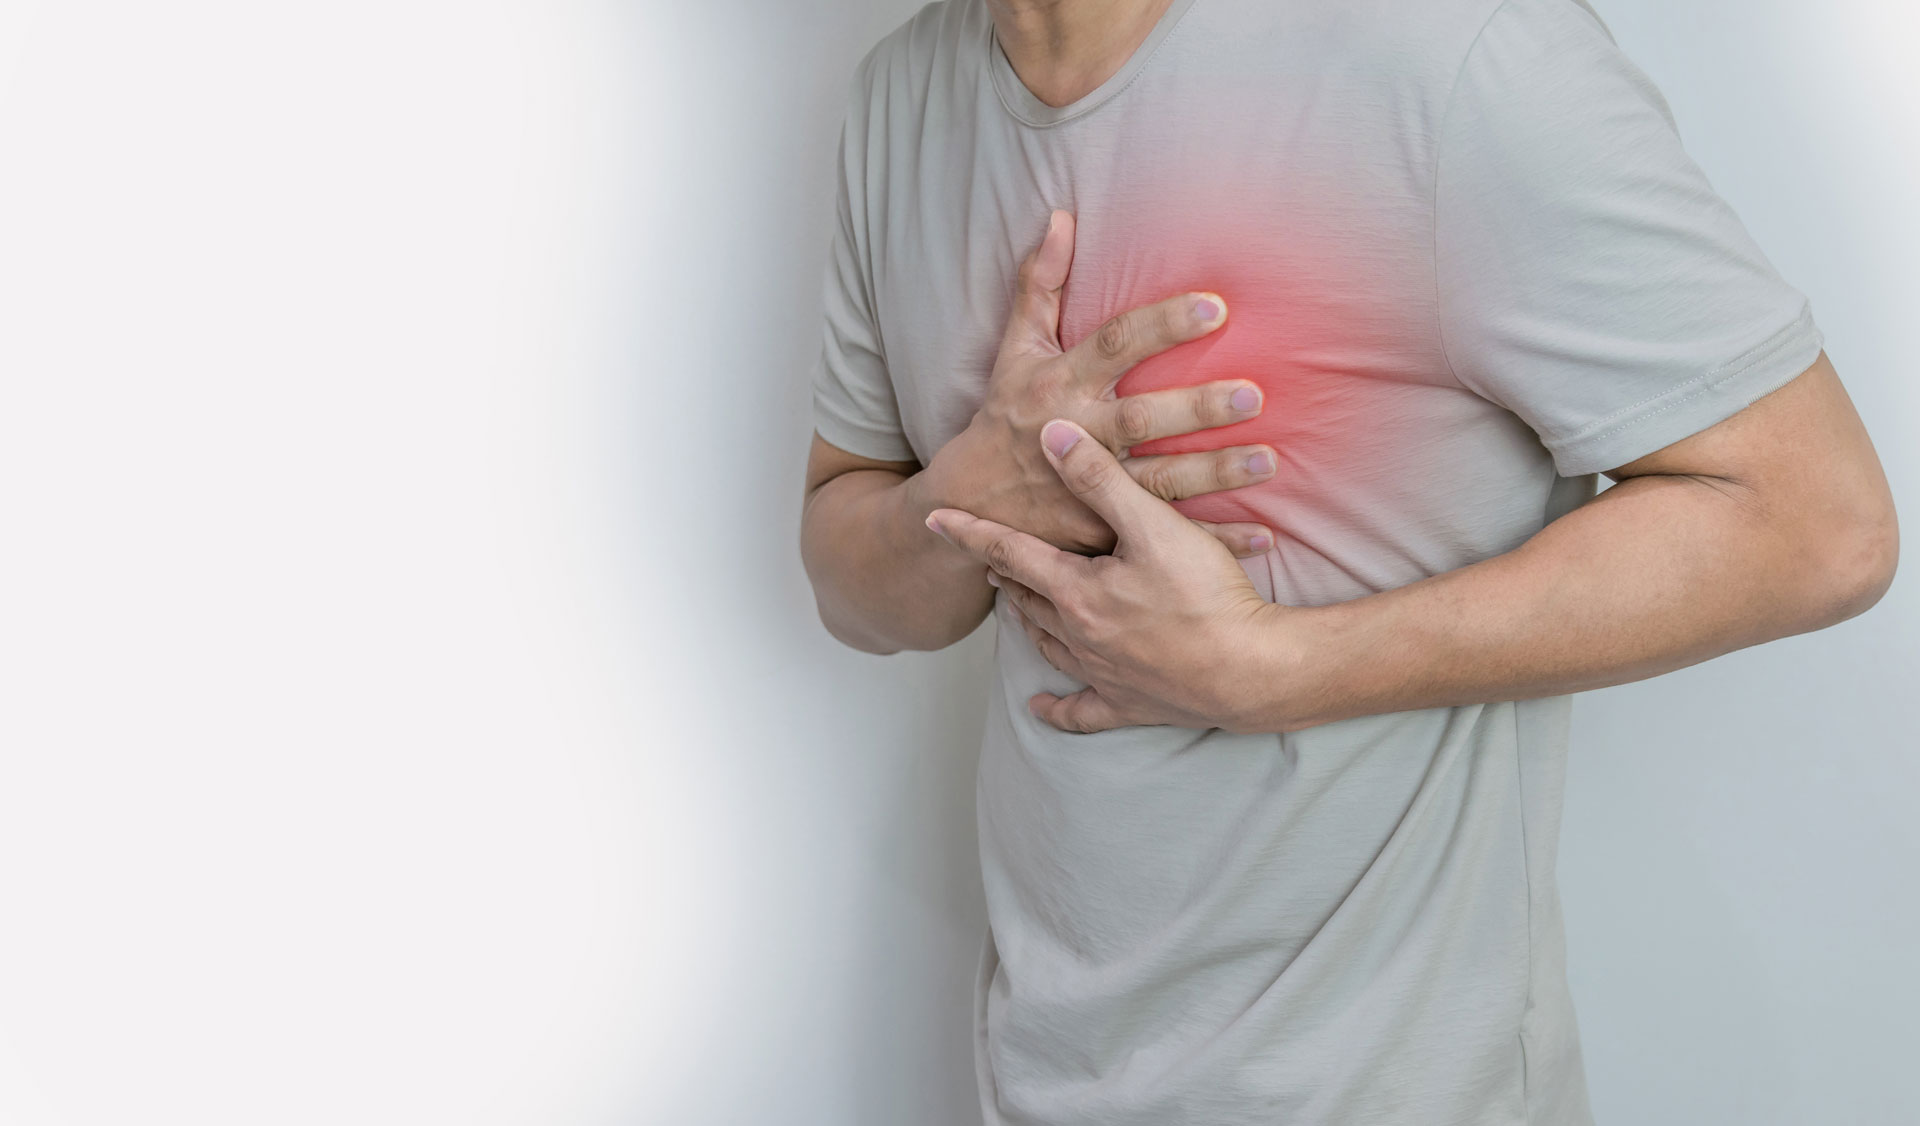 What to Do if You or Someone You’re With Shows Signs of a Heart Attack